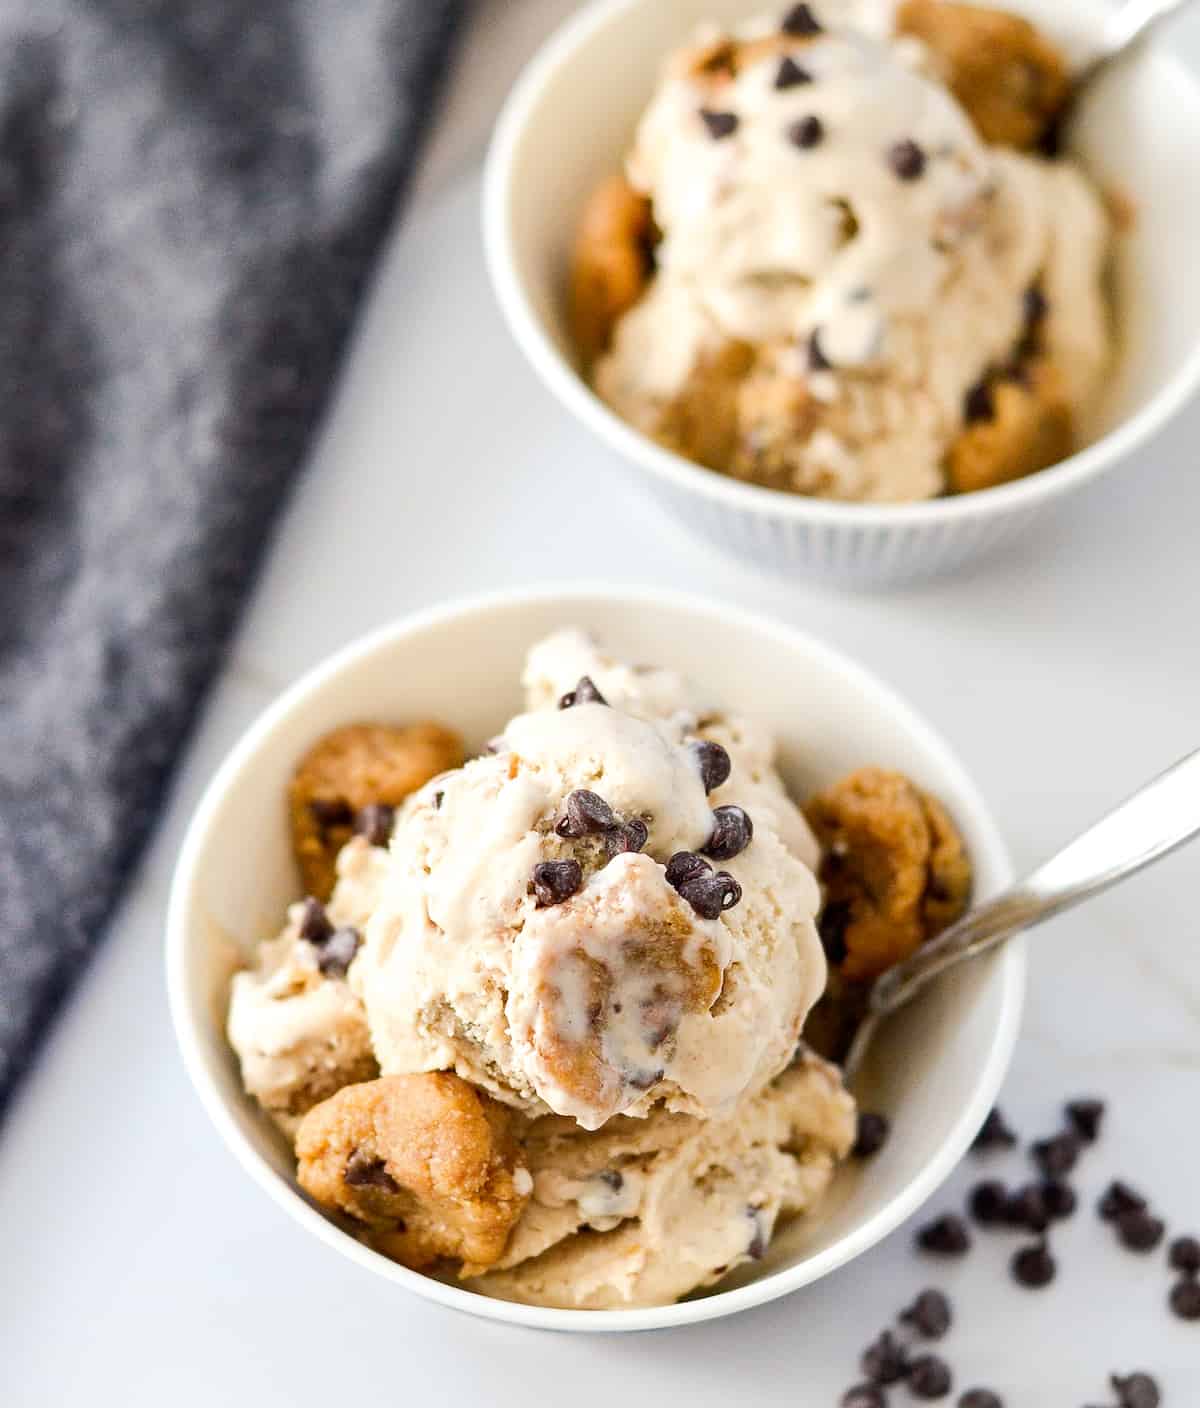 Overhead view of two bowls of cookie dough ice cream sprinkled with chocolate chips